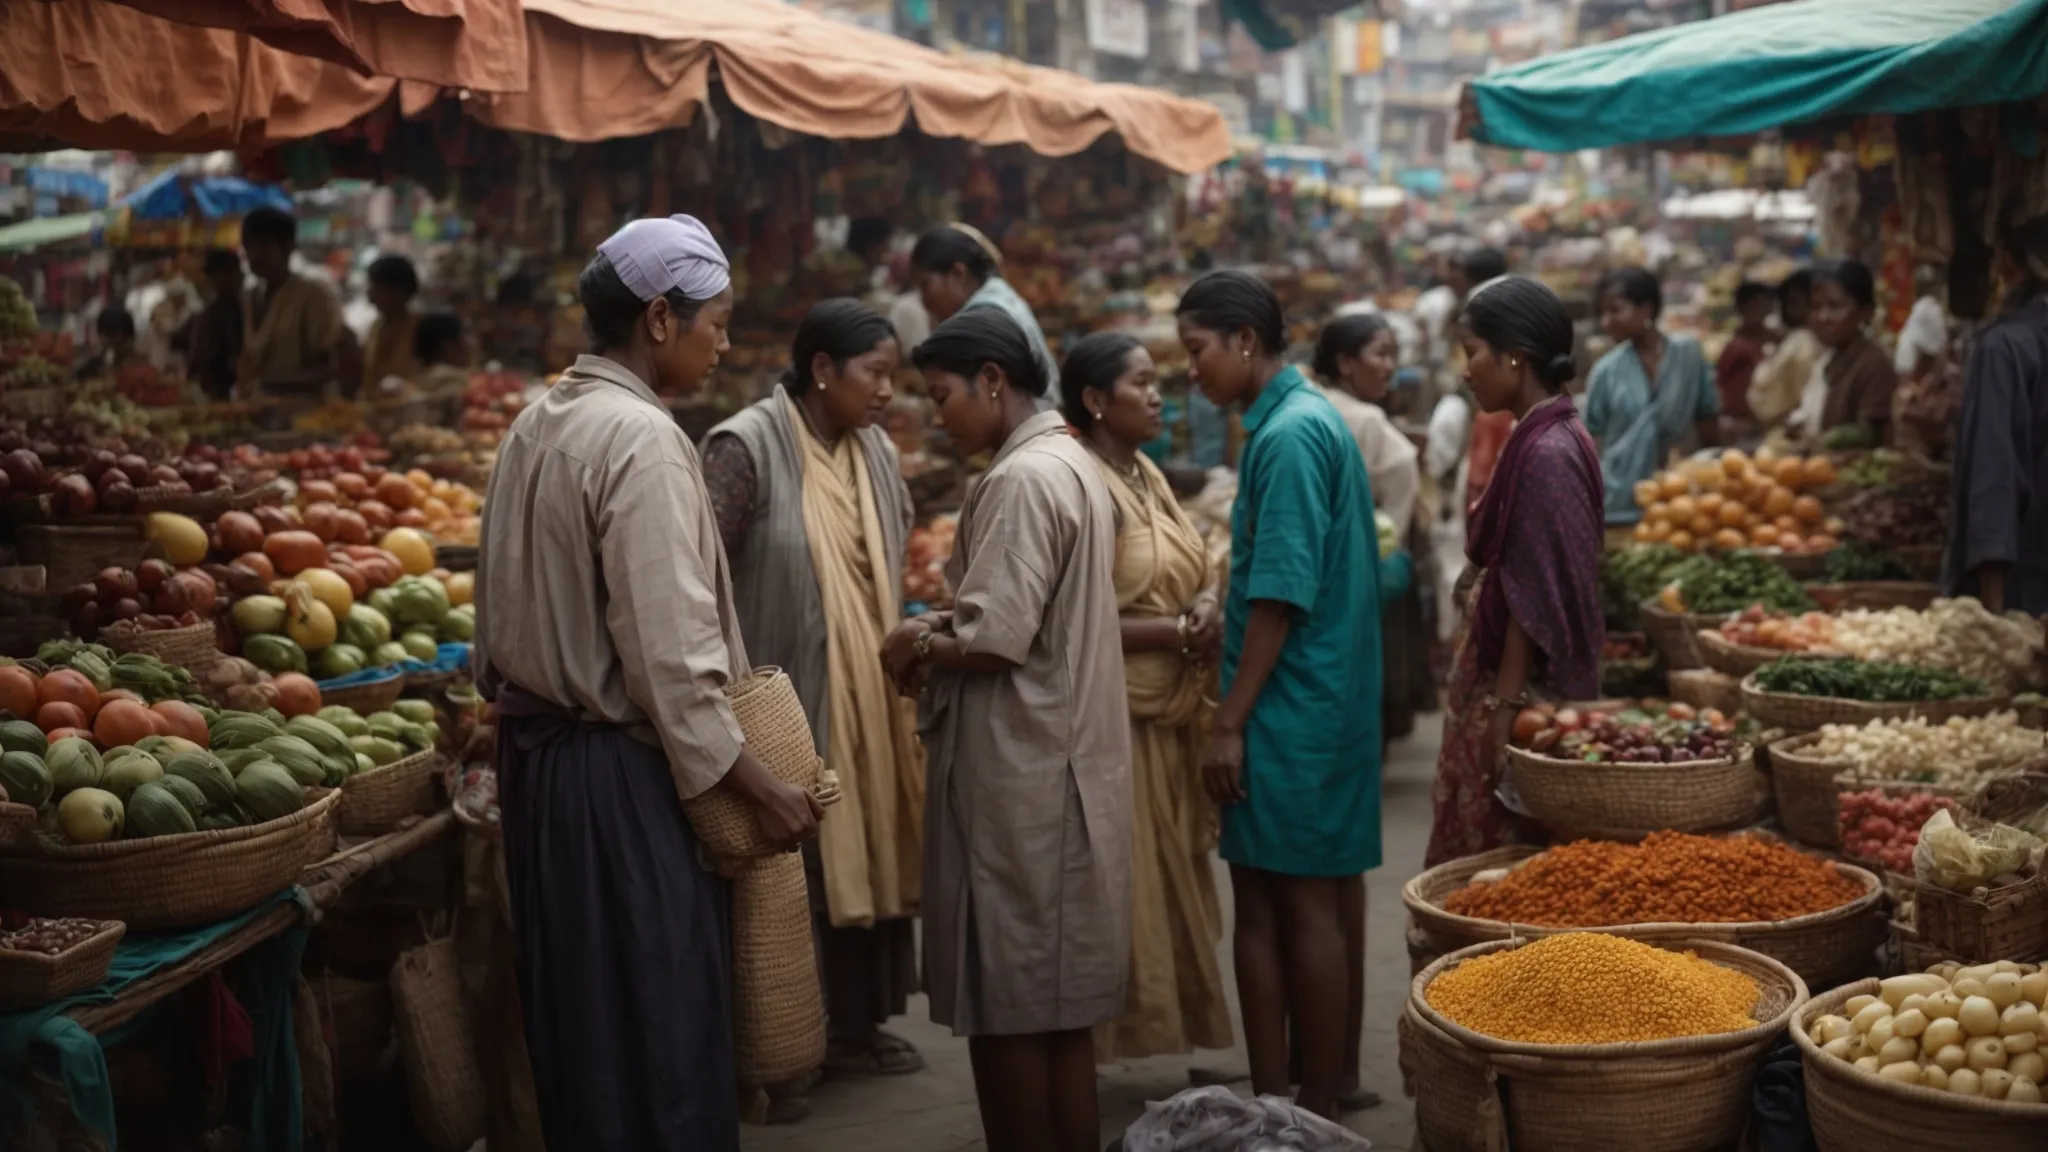 a bustling local market scene with vendors displaying culturally specific goods to enthusiastic shoppers.